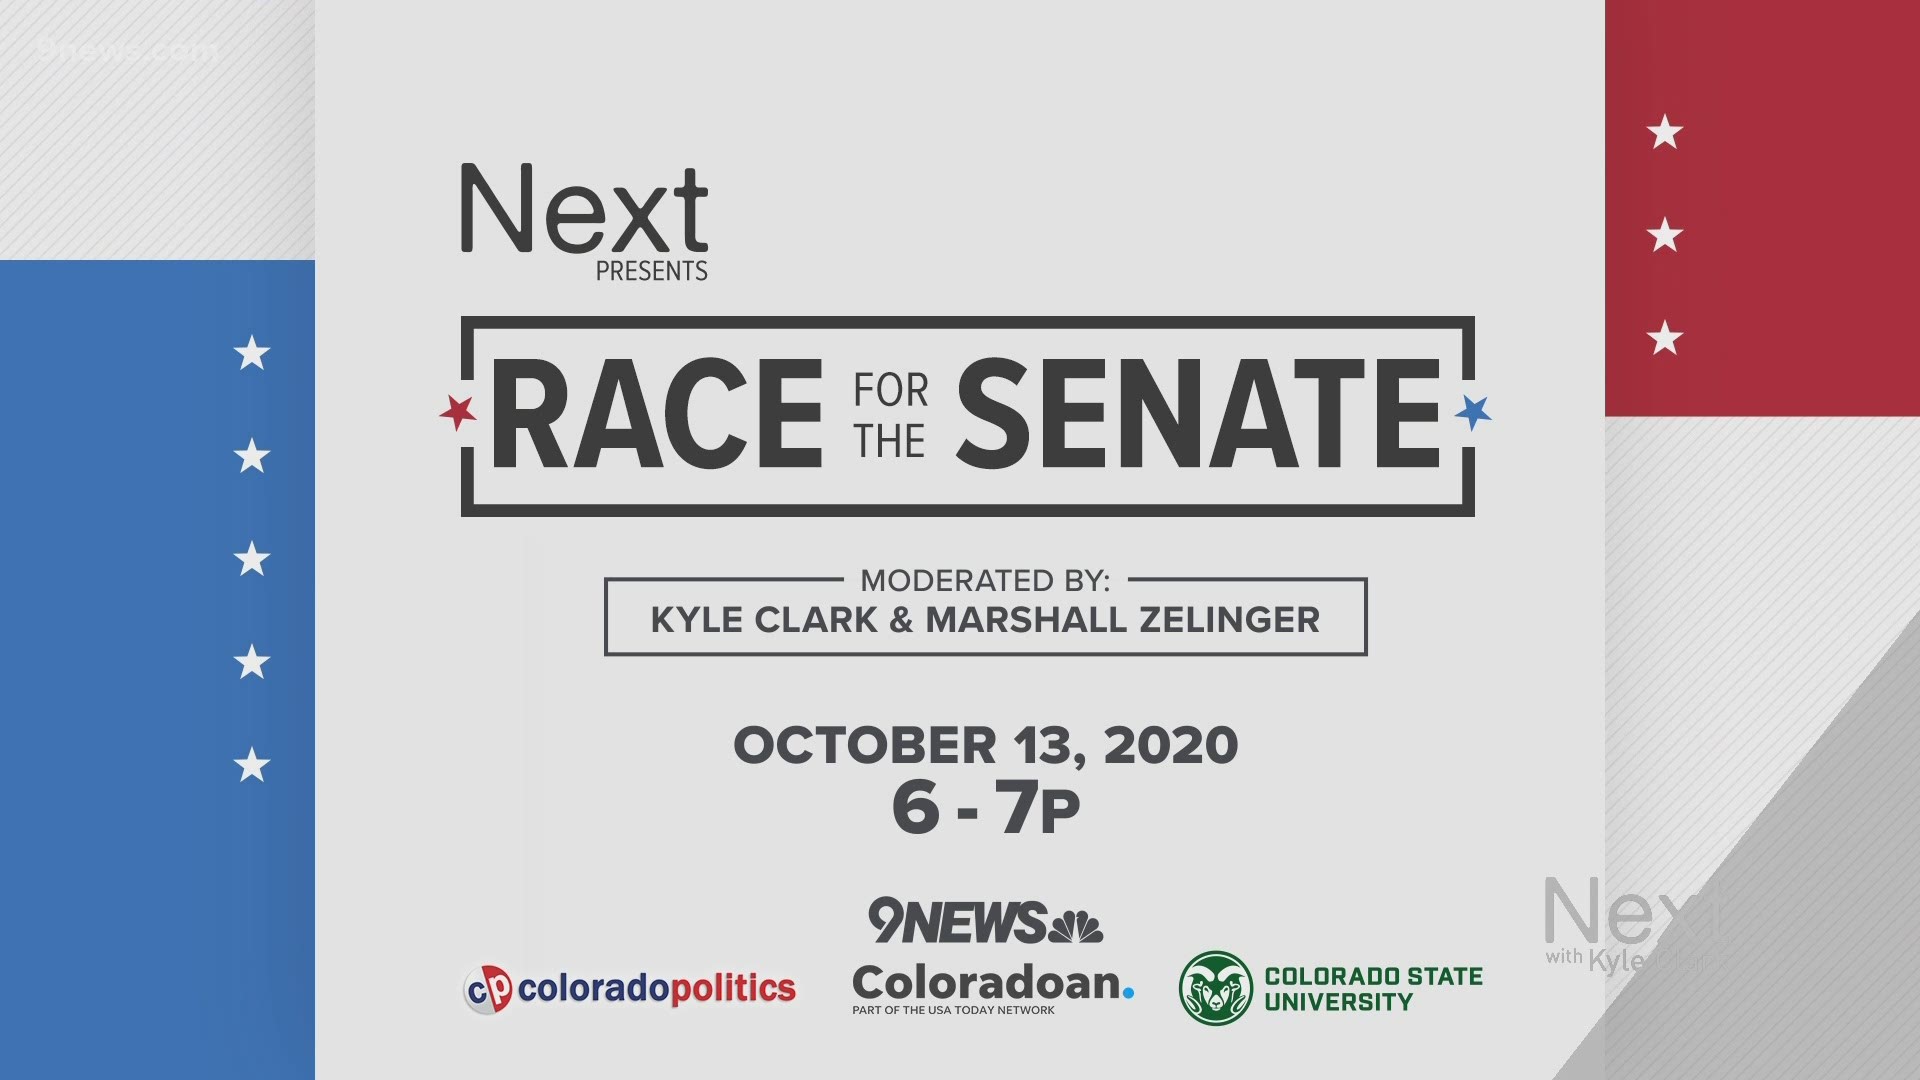 Sen. Cory Gardner and Democrat John Hickenlooper will debate on 9NEWS in October. This question followed the first presidential debate with repeated disruptions.